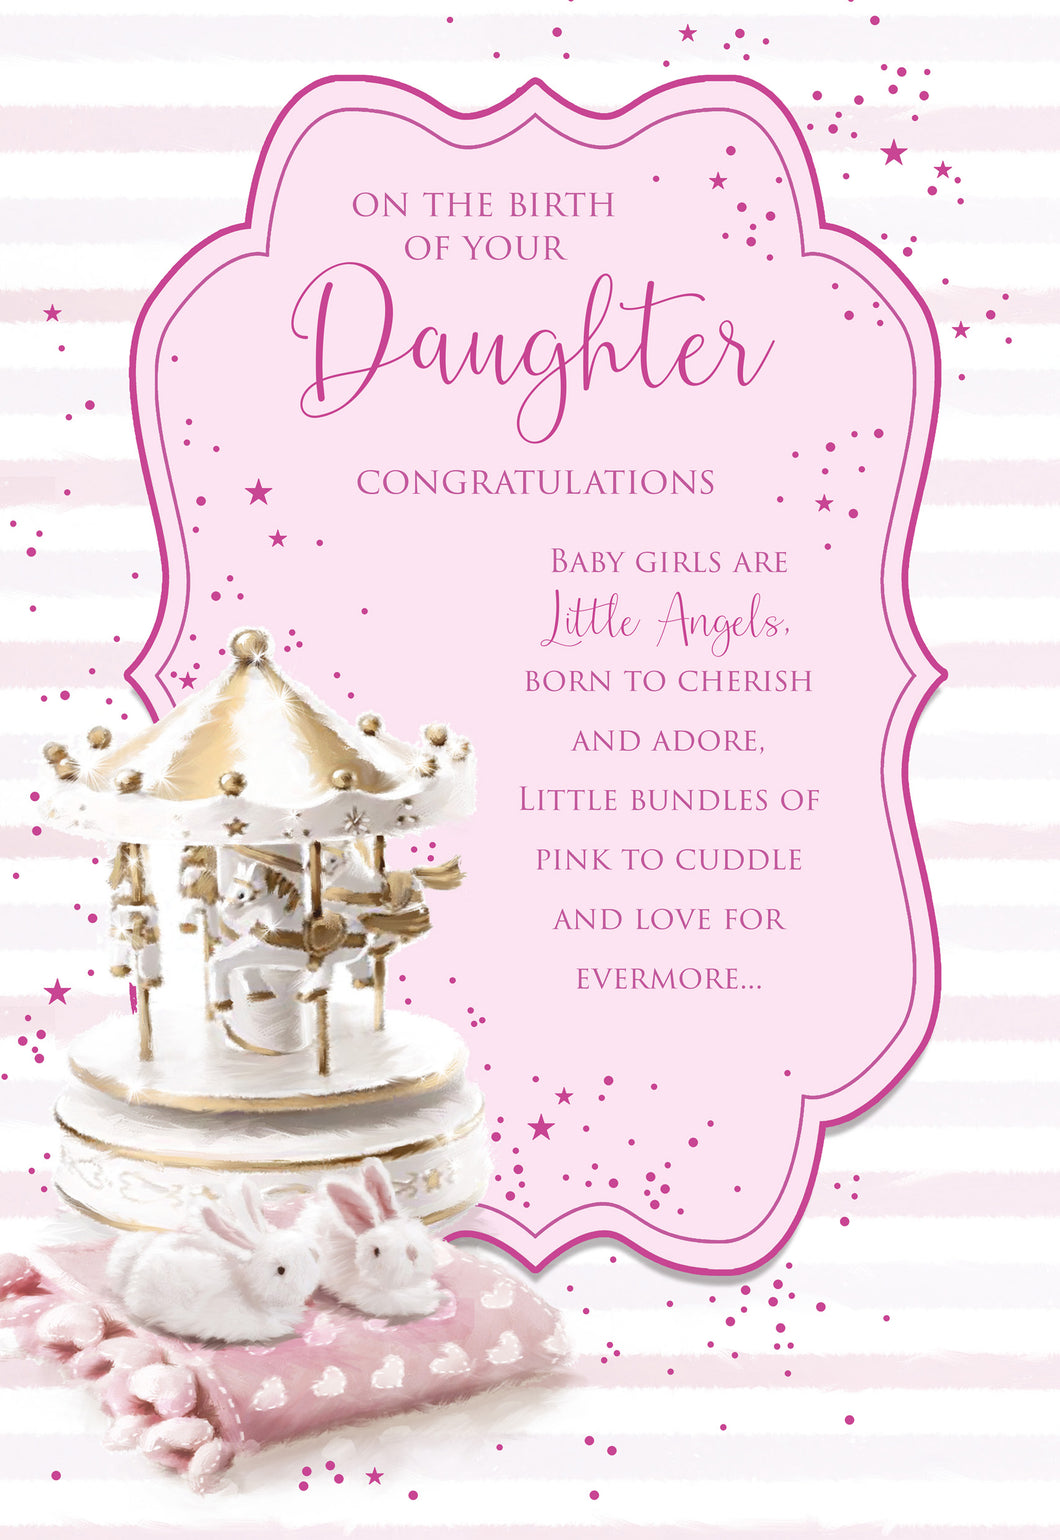 Birth of Your Daughter - New Baby Card